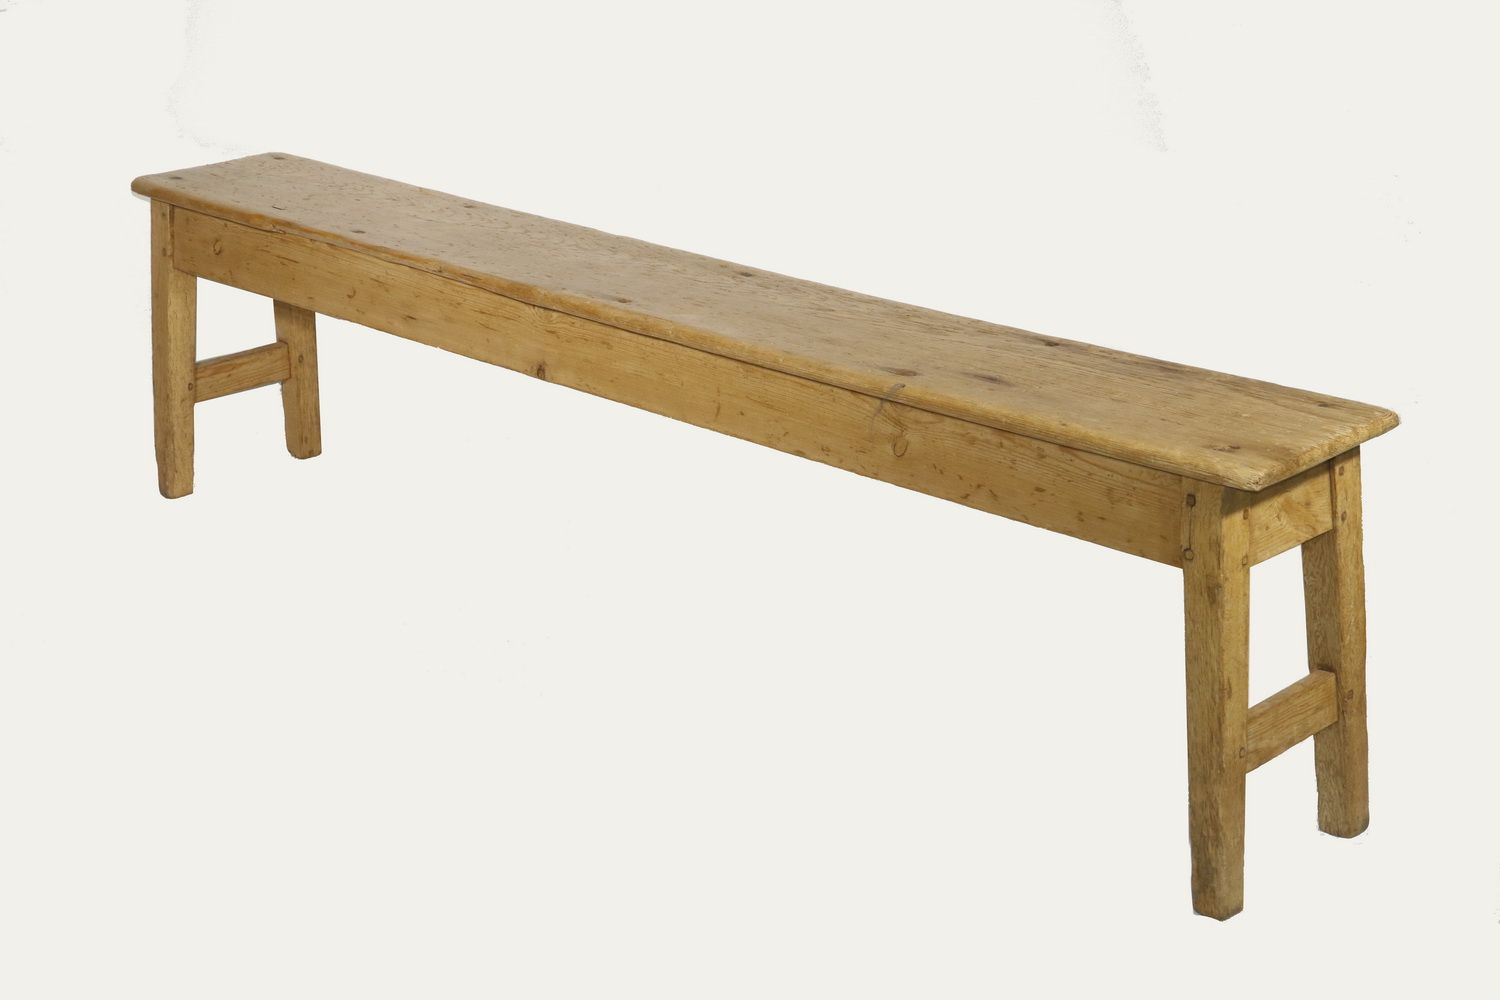 EARLY FRENCH SCRUBBED PINE BENCH 2b5106